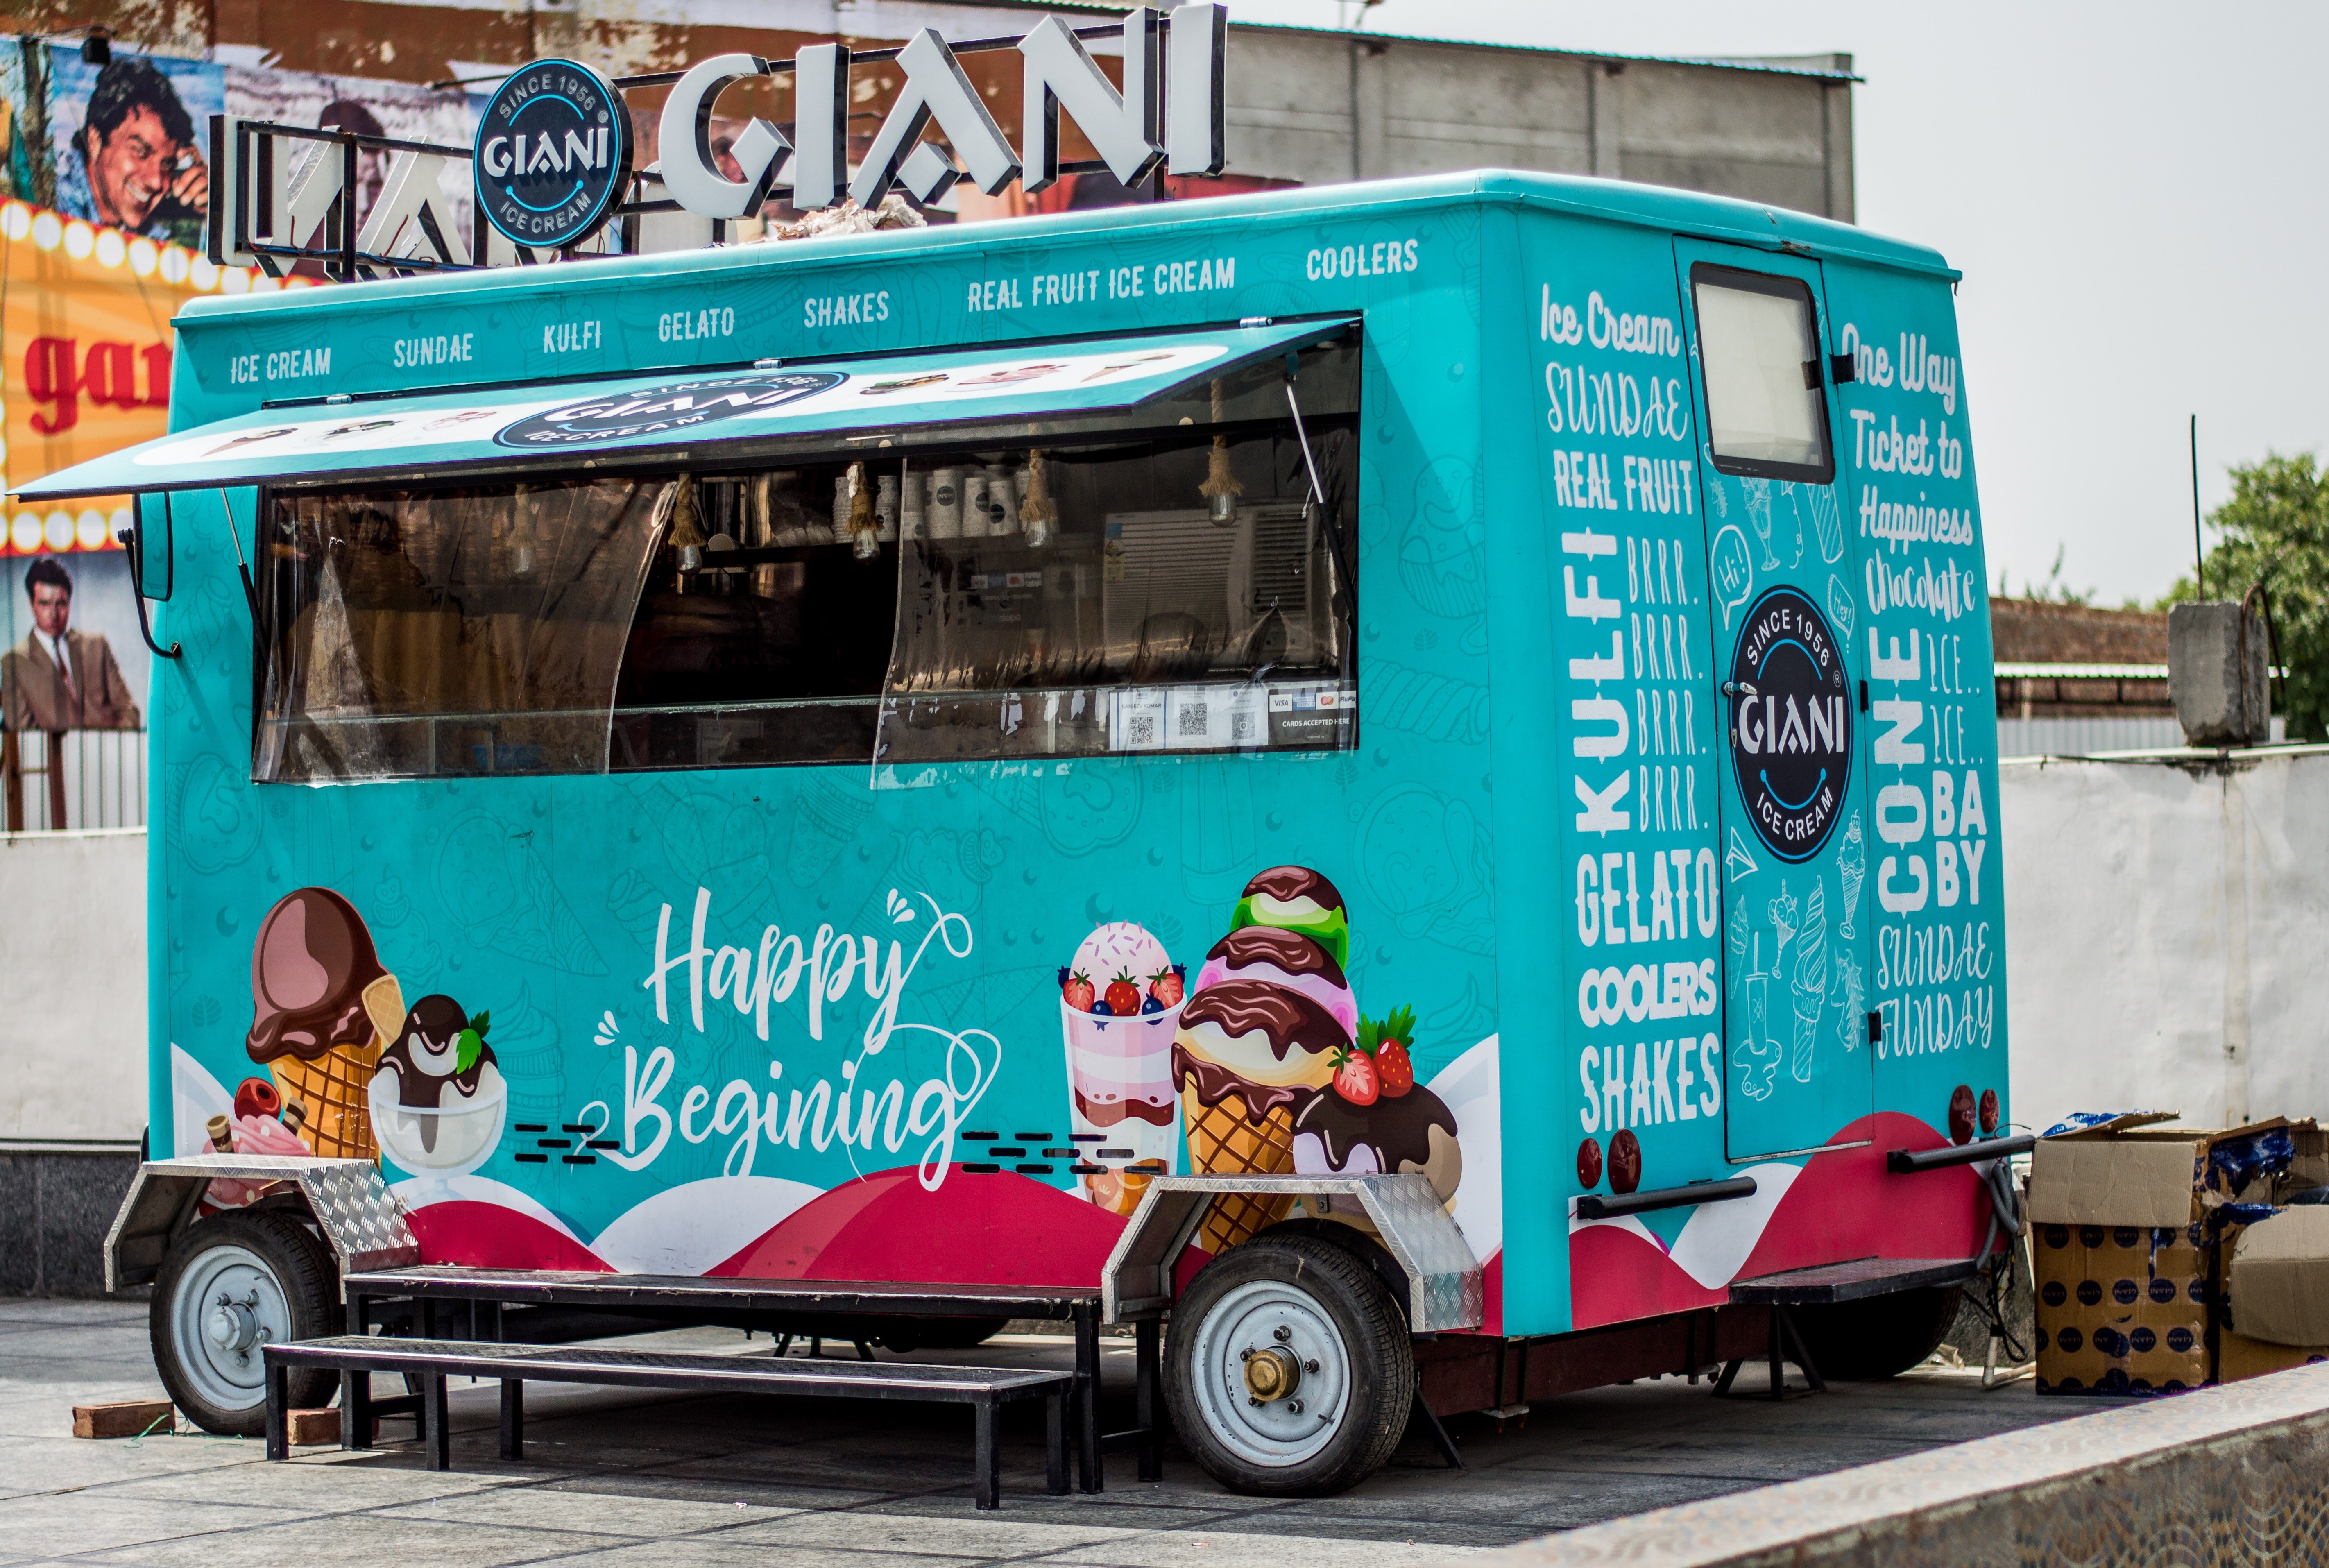 A blue ice cream truck with the words 'Happy Beginning' painted on the side is open for business | Photo: Pexels/Prithpal Bhatia 